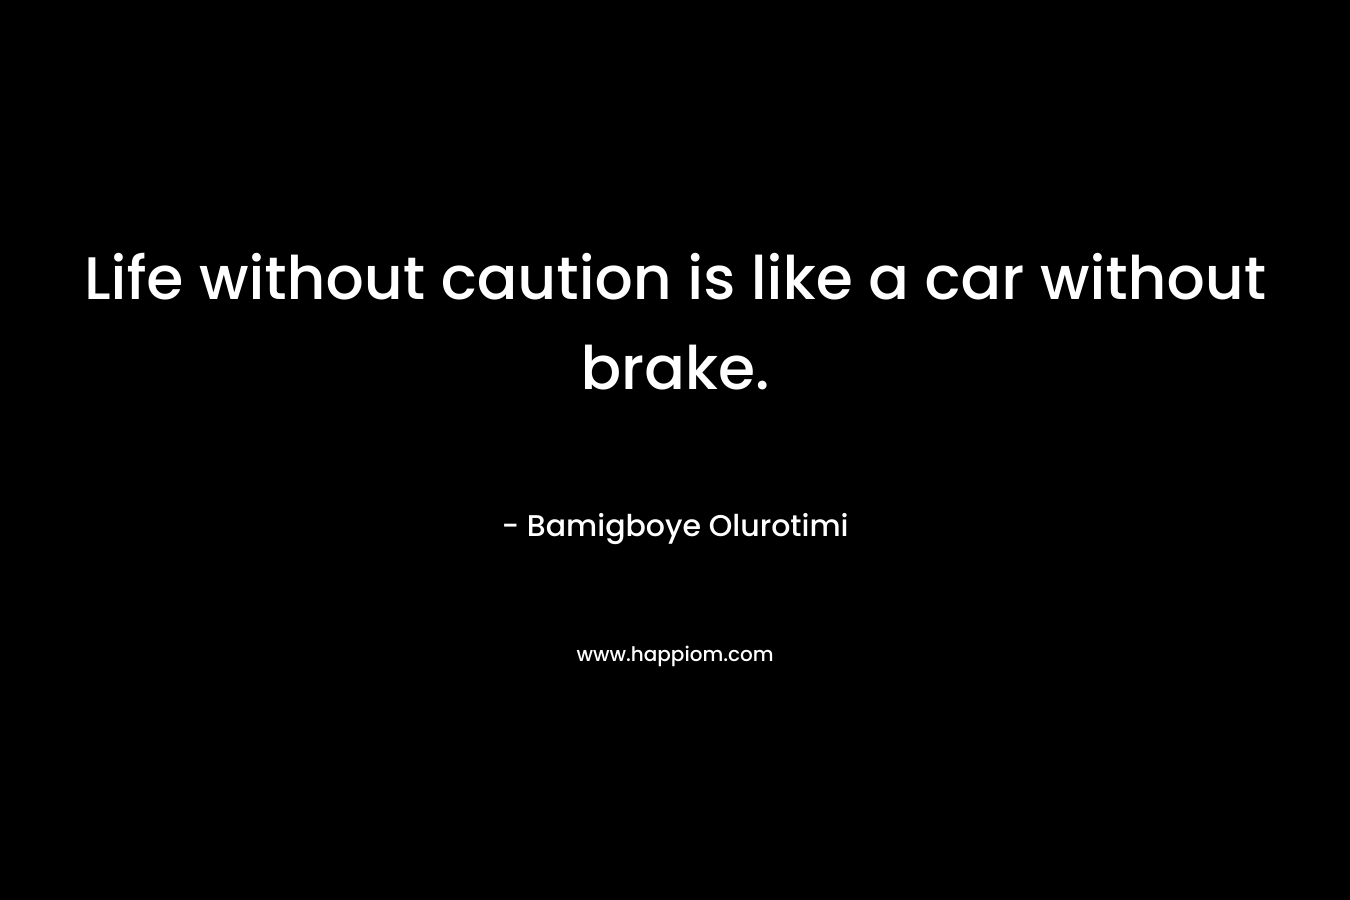 Life without caution is like a car without brake. – Bamigboye Olurotimi